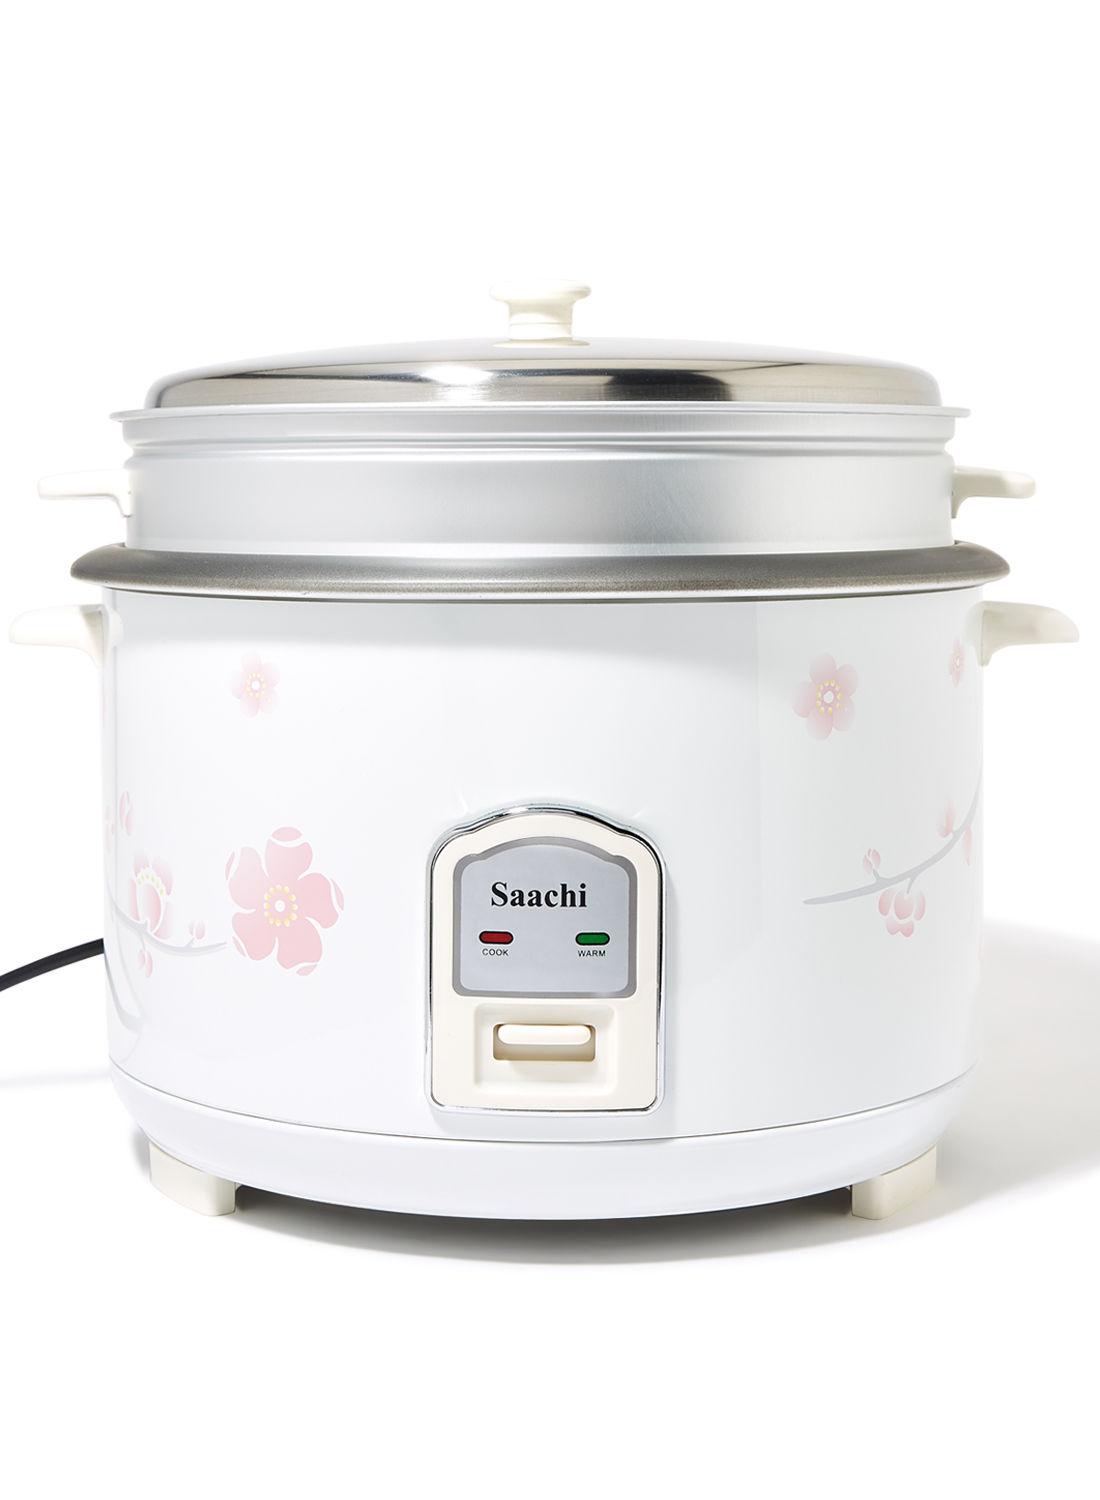 Saachi Rice Cooker With A Keep Warm Function 4.6 l 1600 W NL RC 5177 WH White